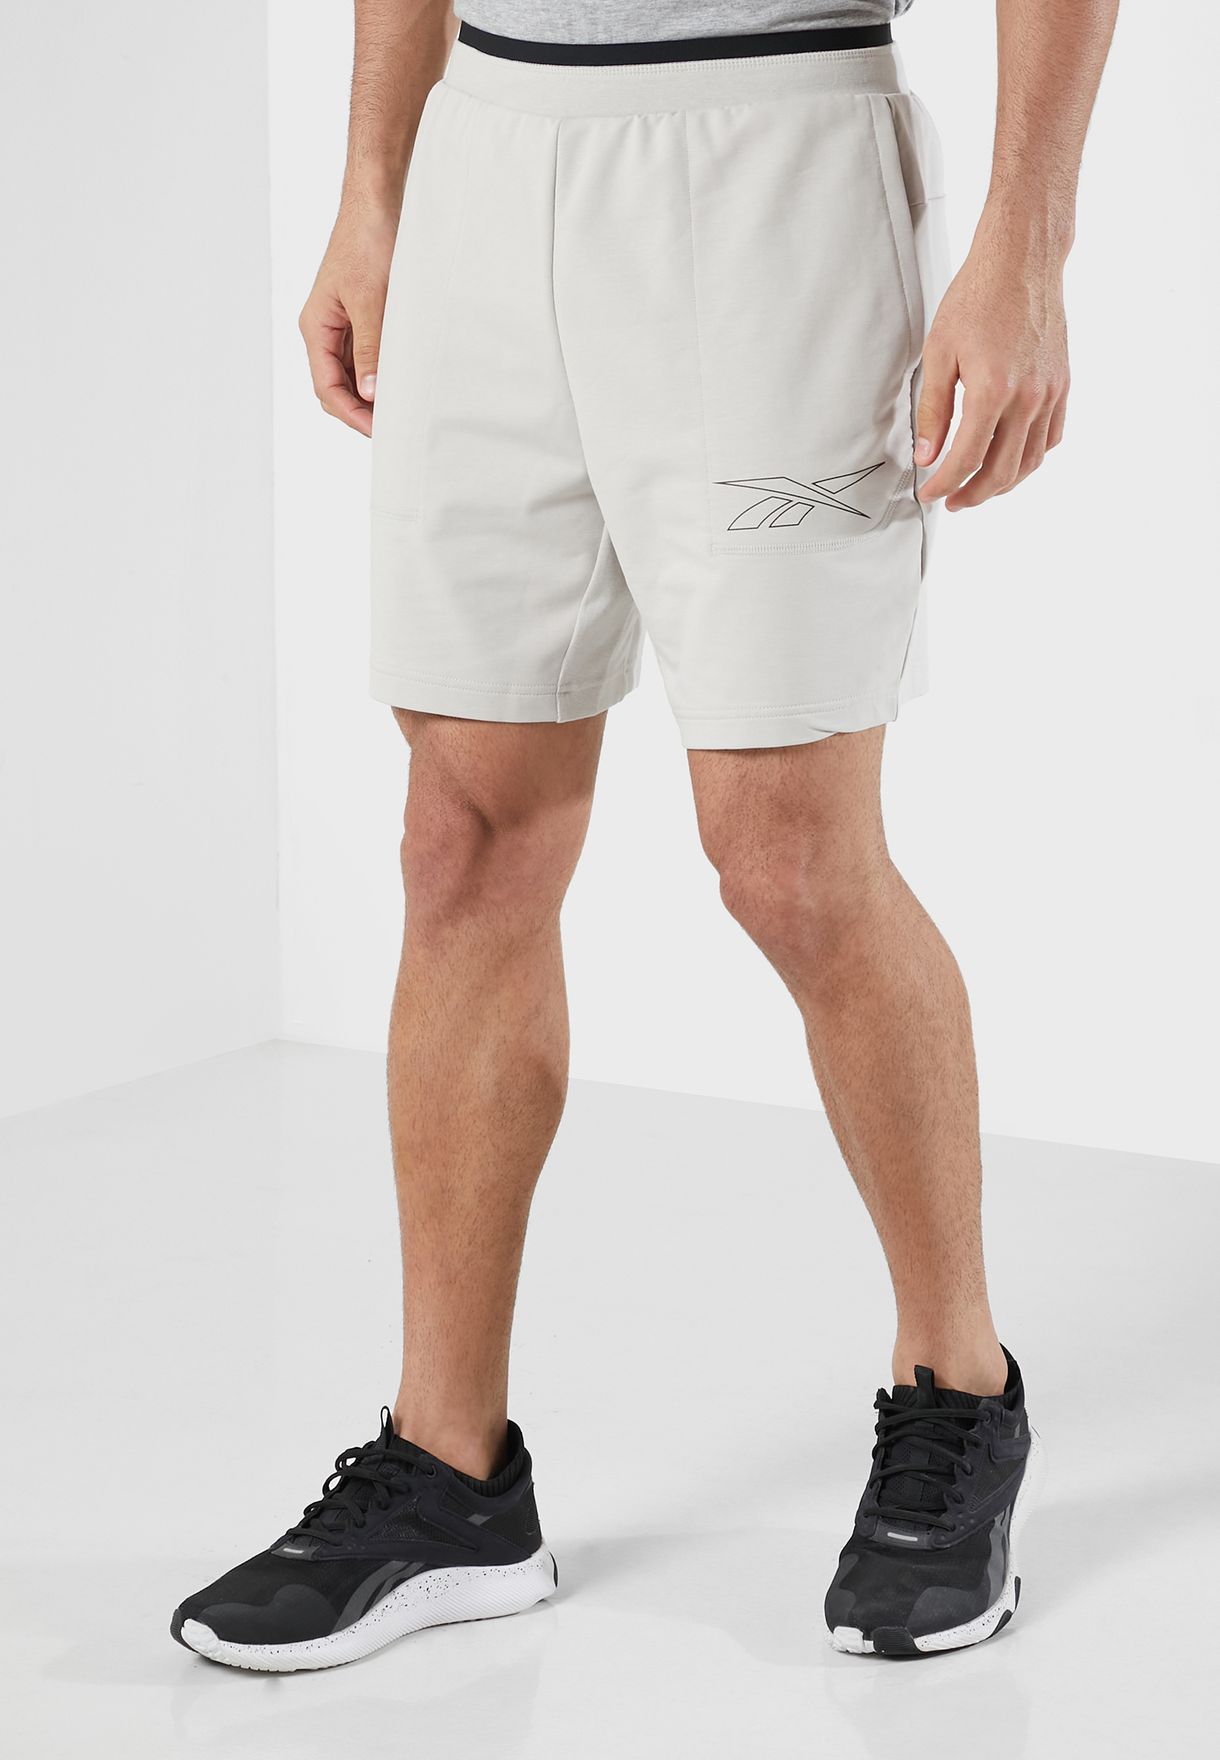 United By Fitness Knit Shorts